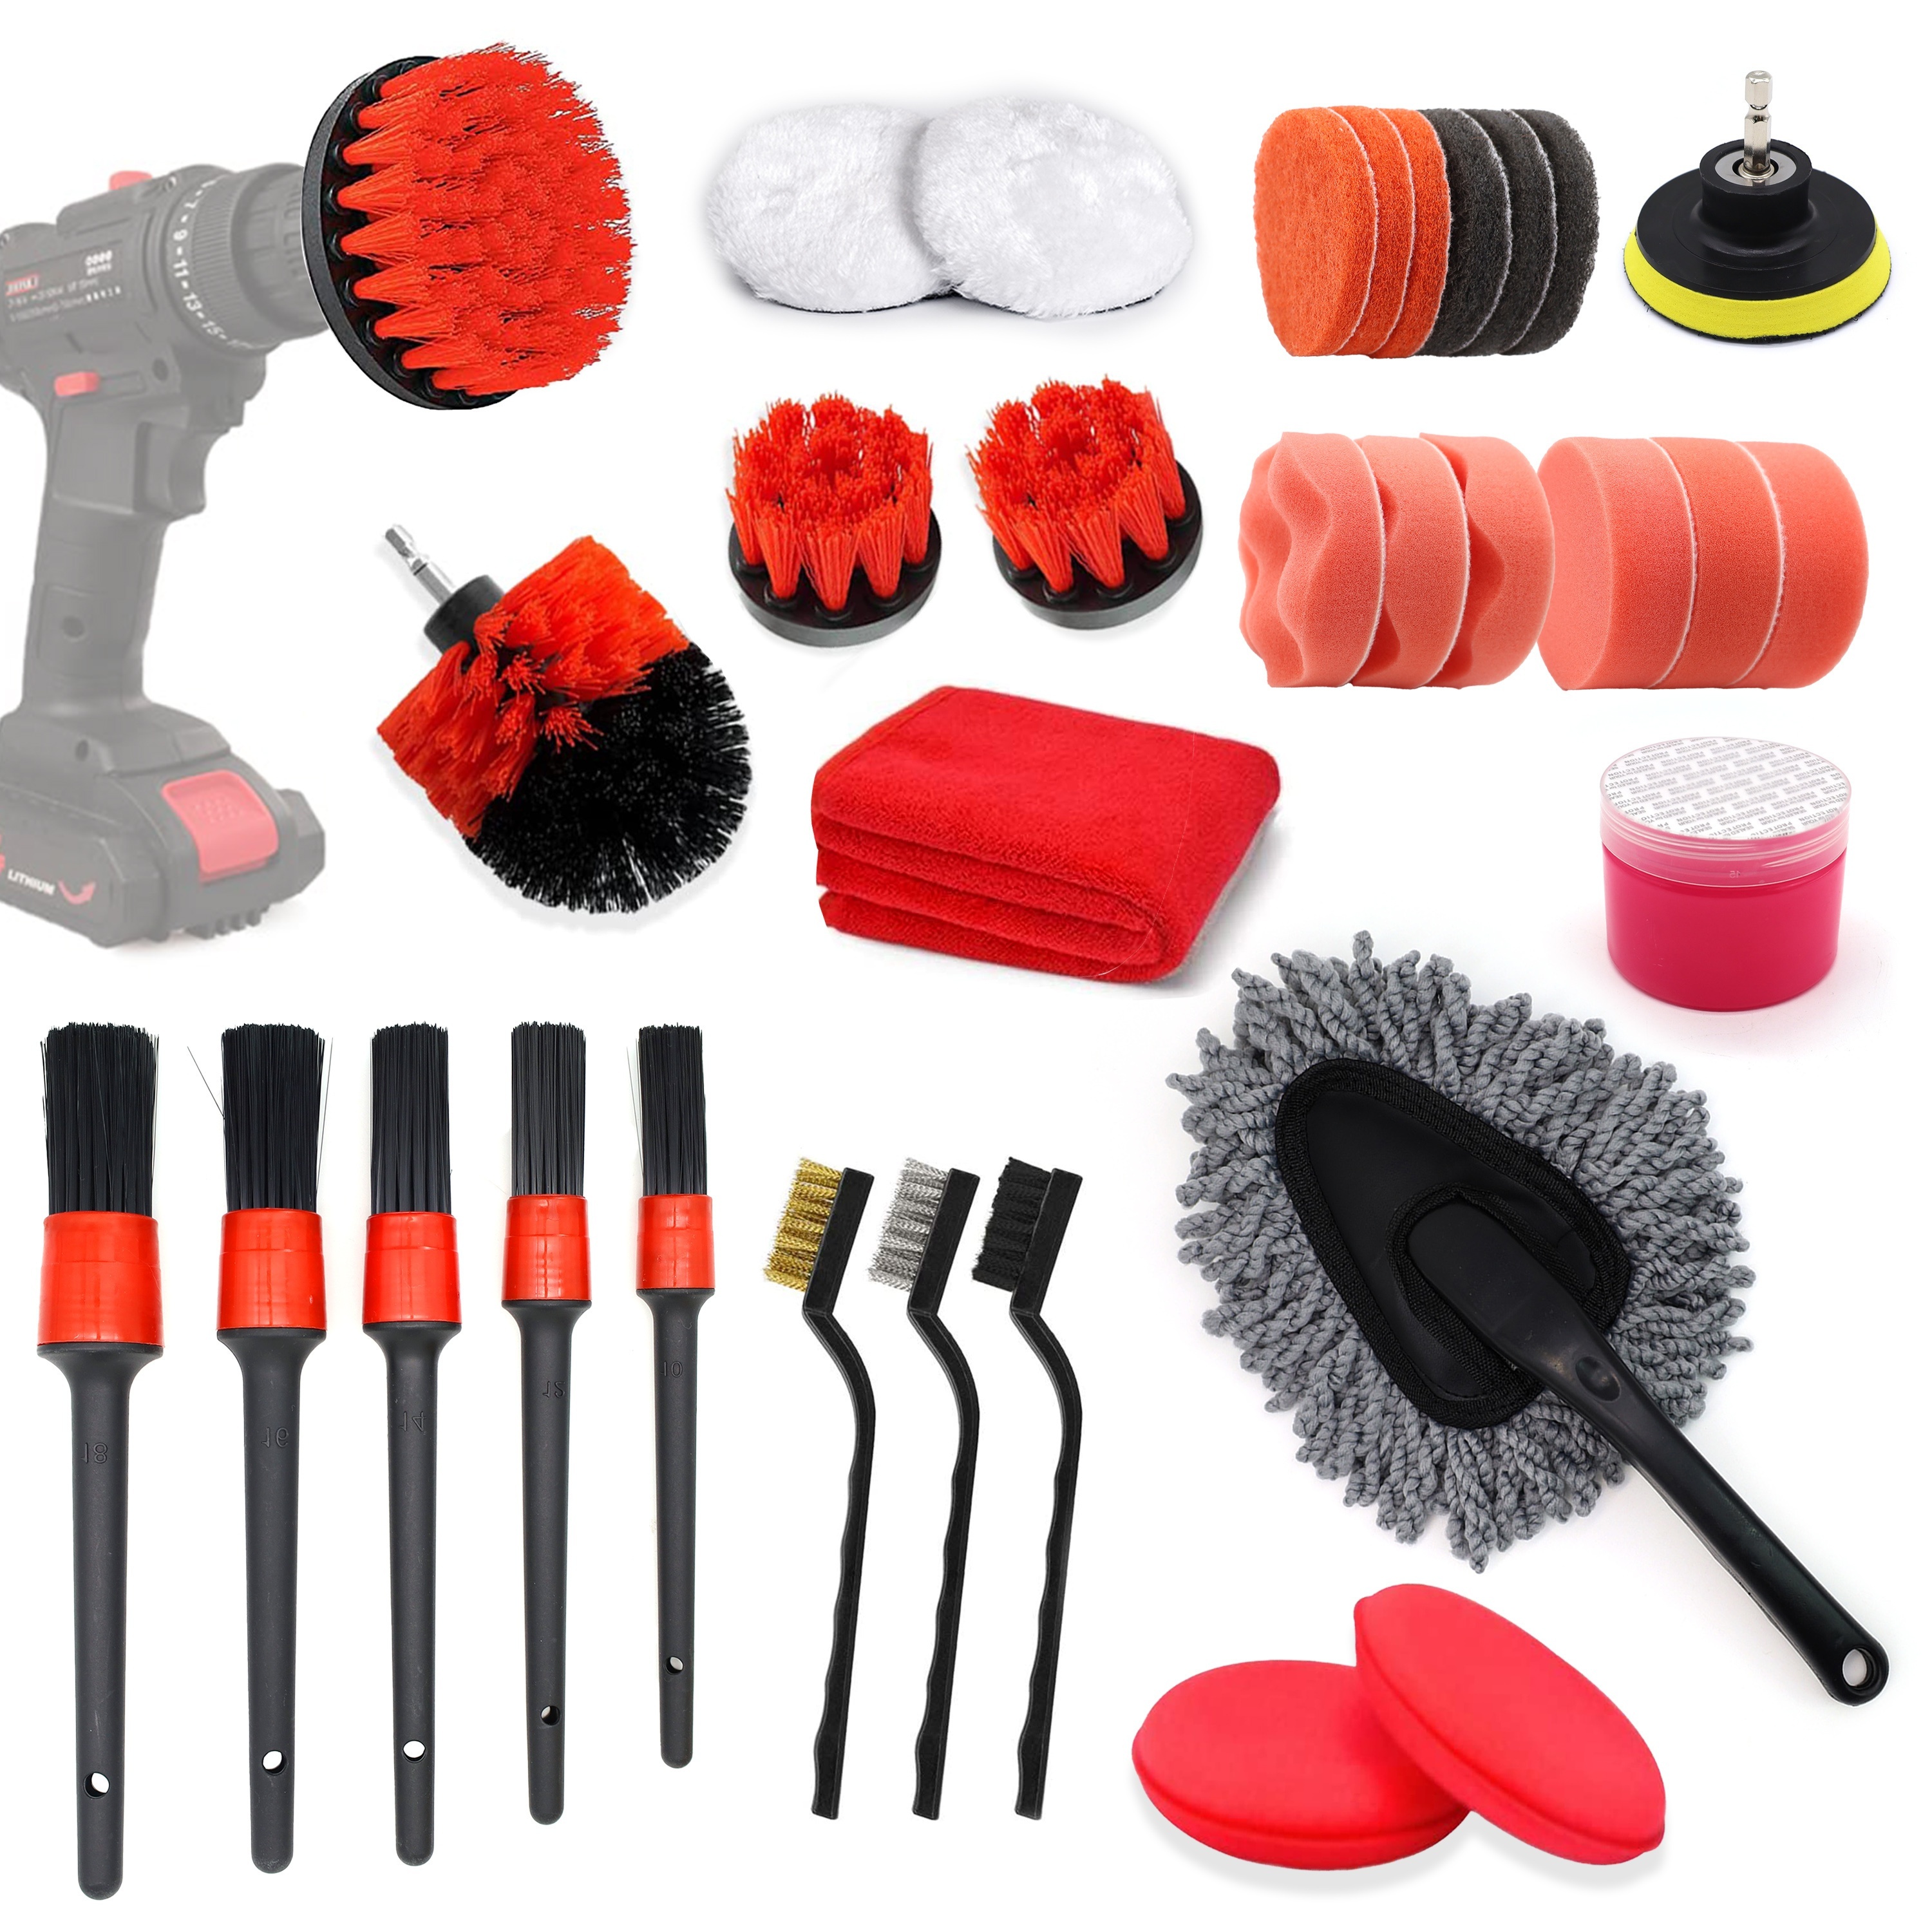 Car Cleaning Kit Scrubber Drill Detailing Brush Set Air